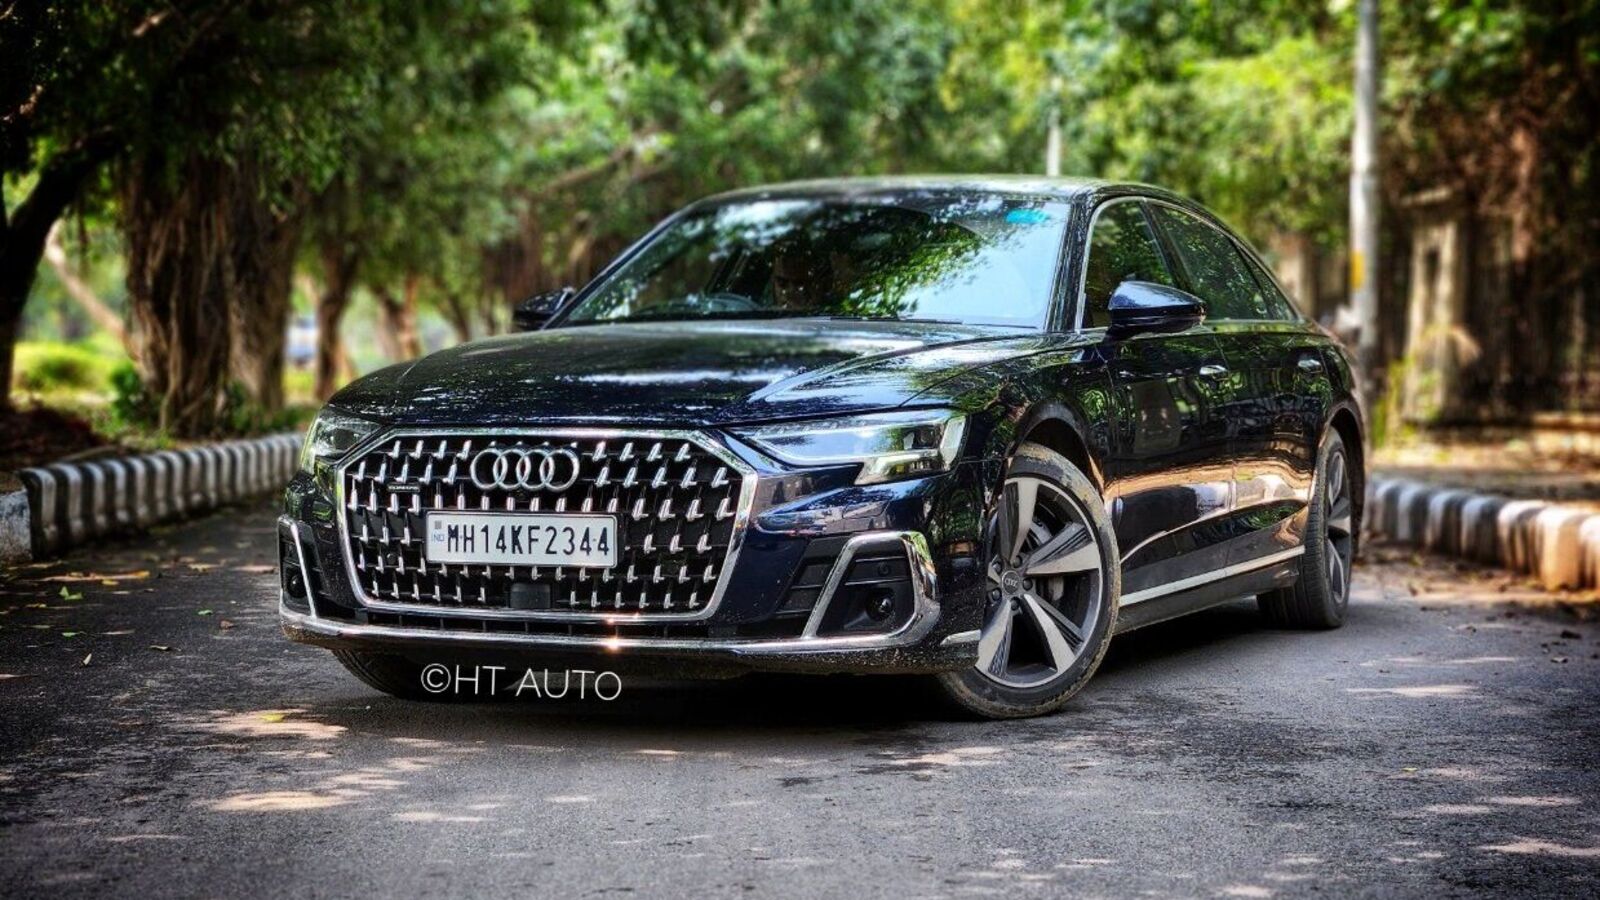 Audi A8 L drive review: The gentleman's luxury flagship ride | HT Auto